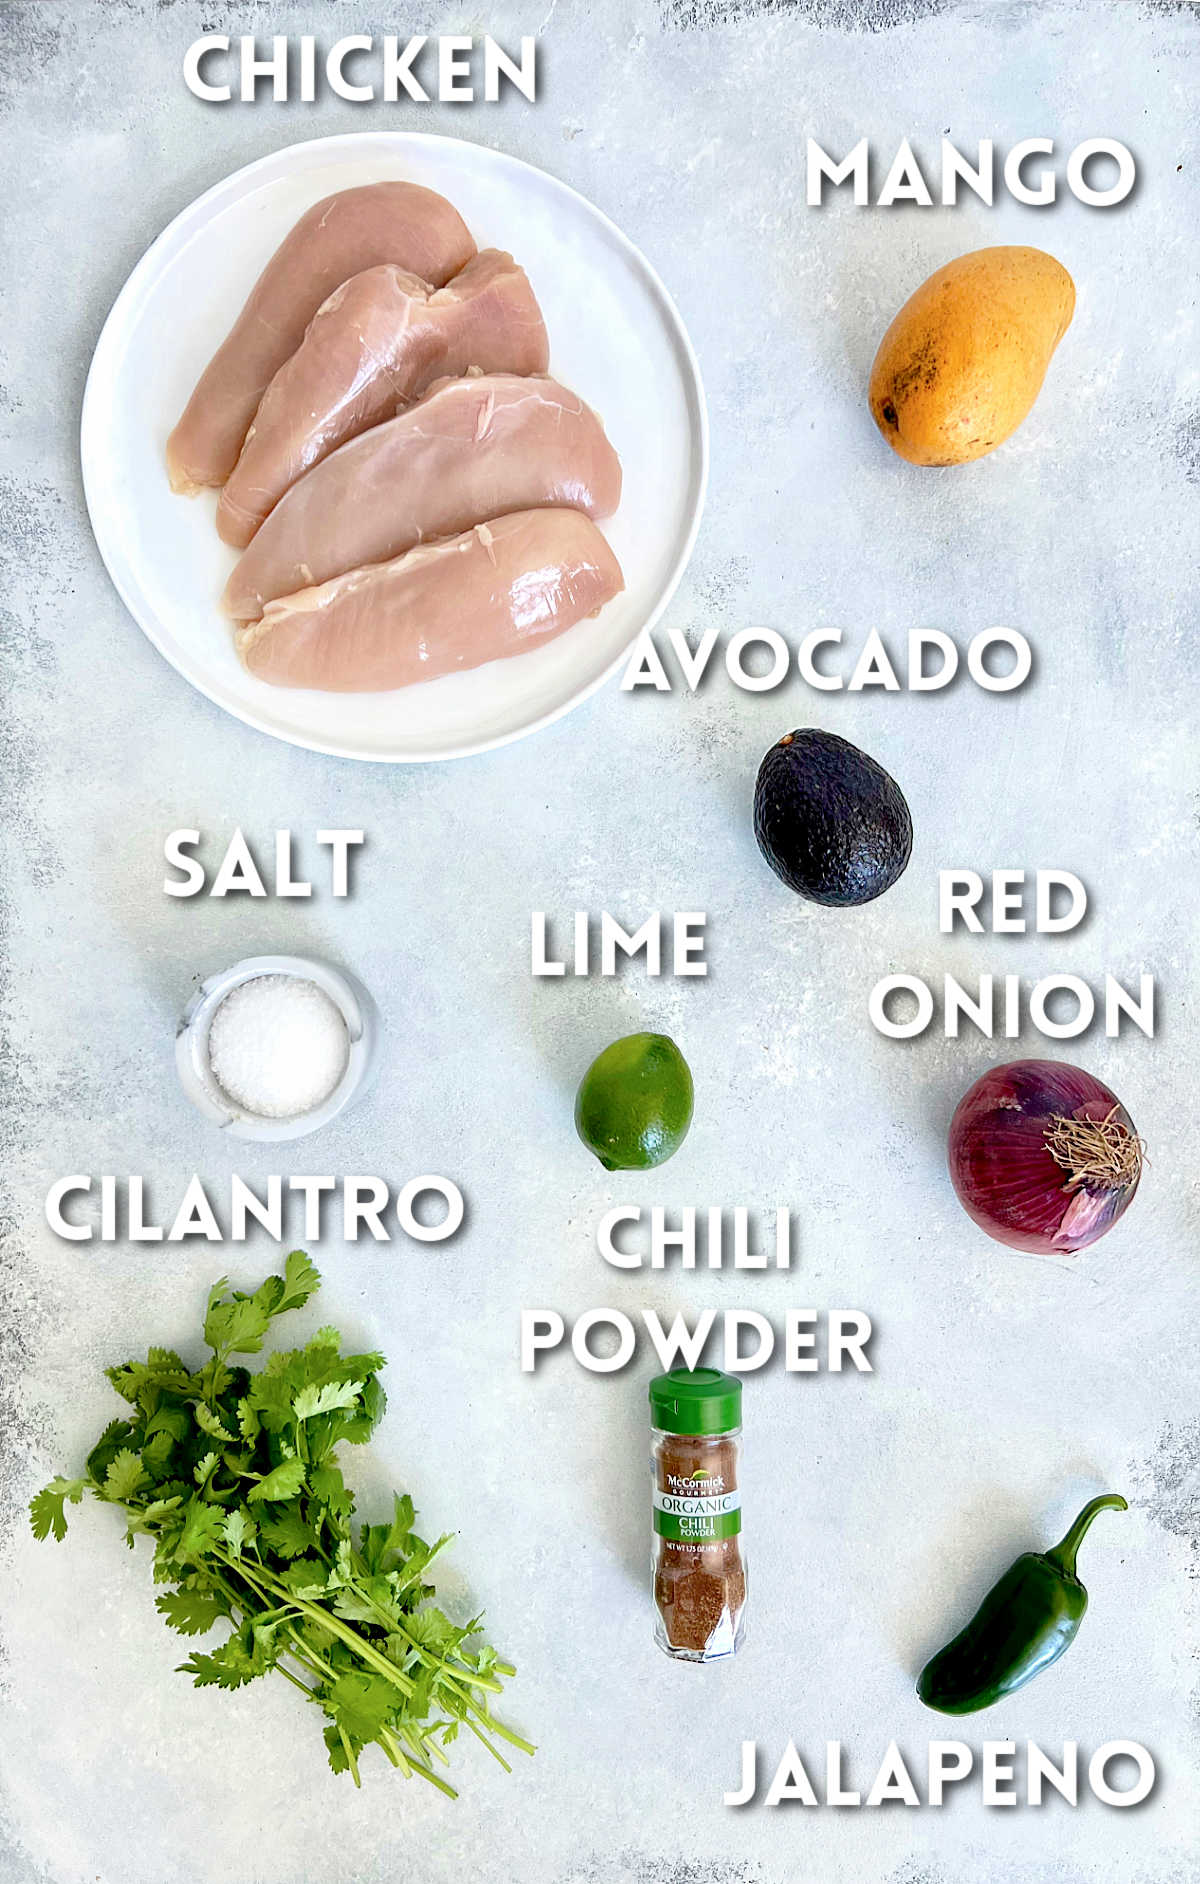 Ingredients for making grilled chicken with mango avocado salsa.